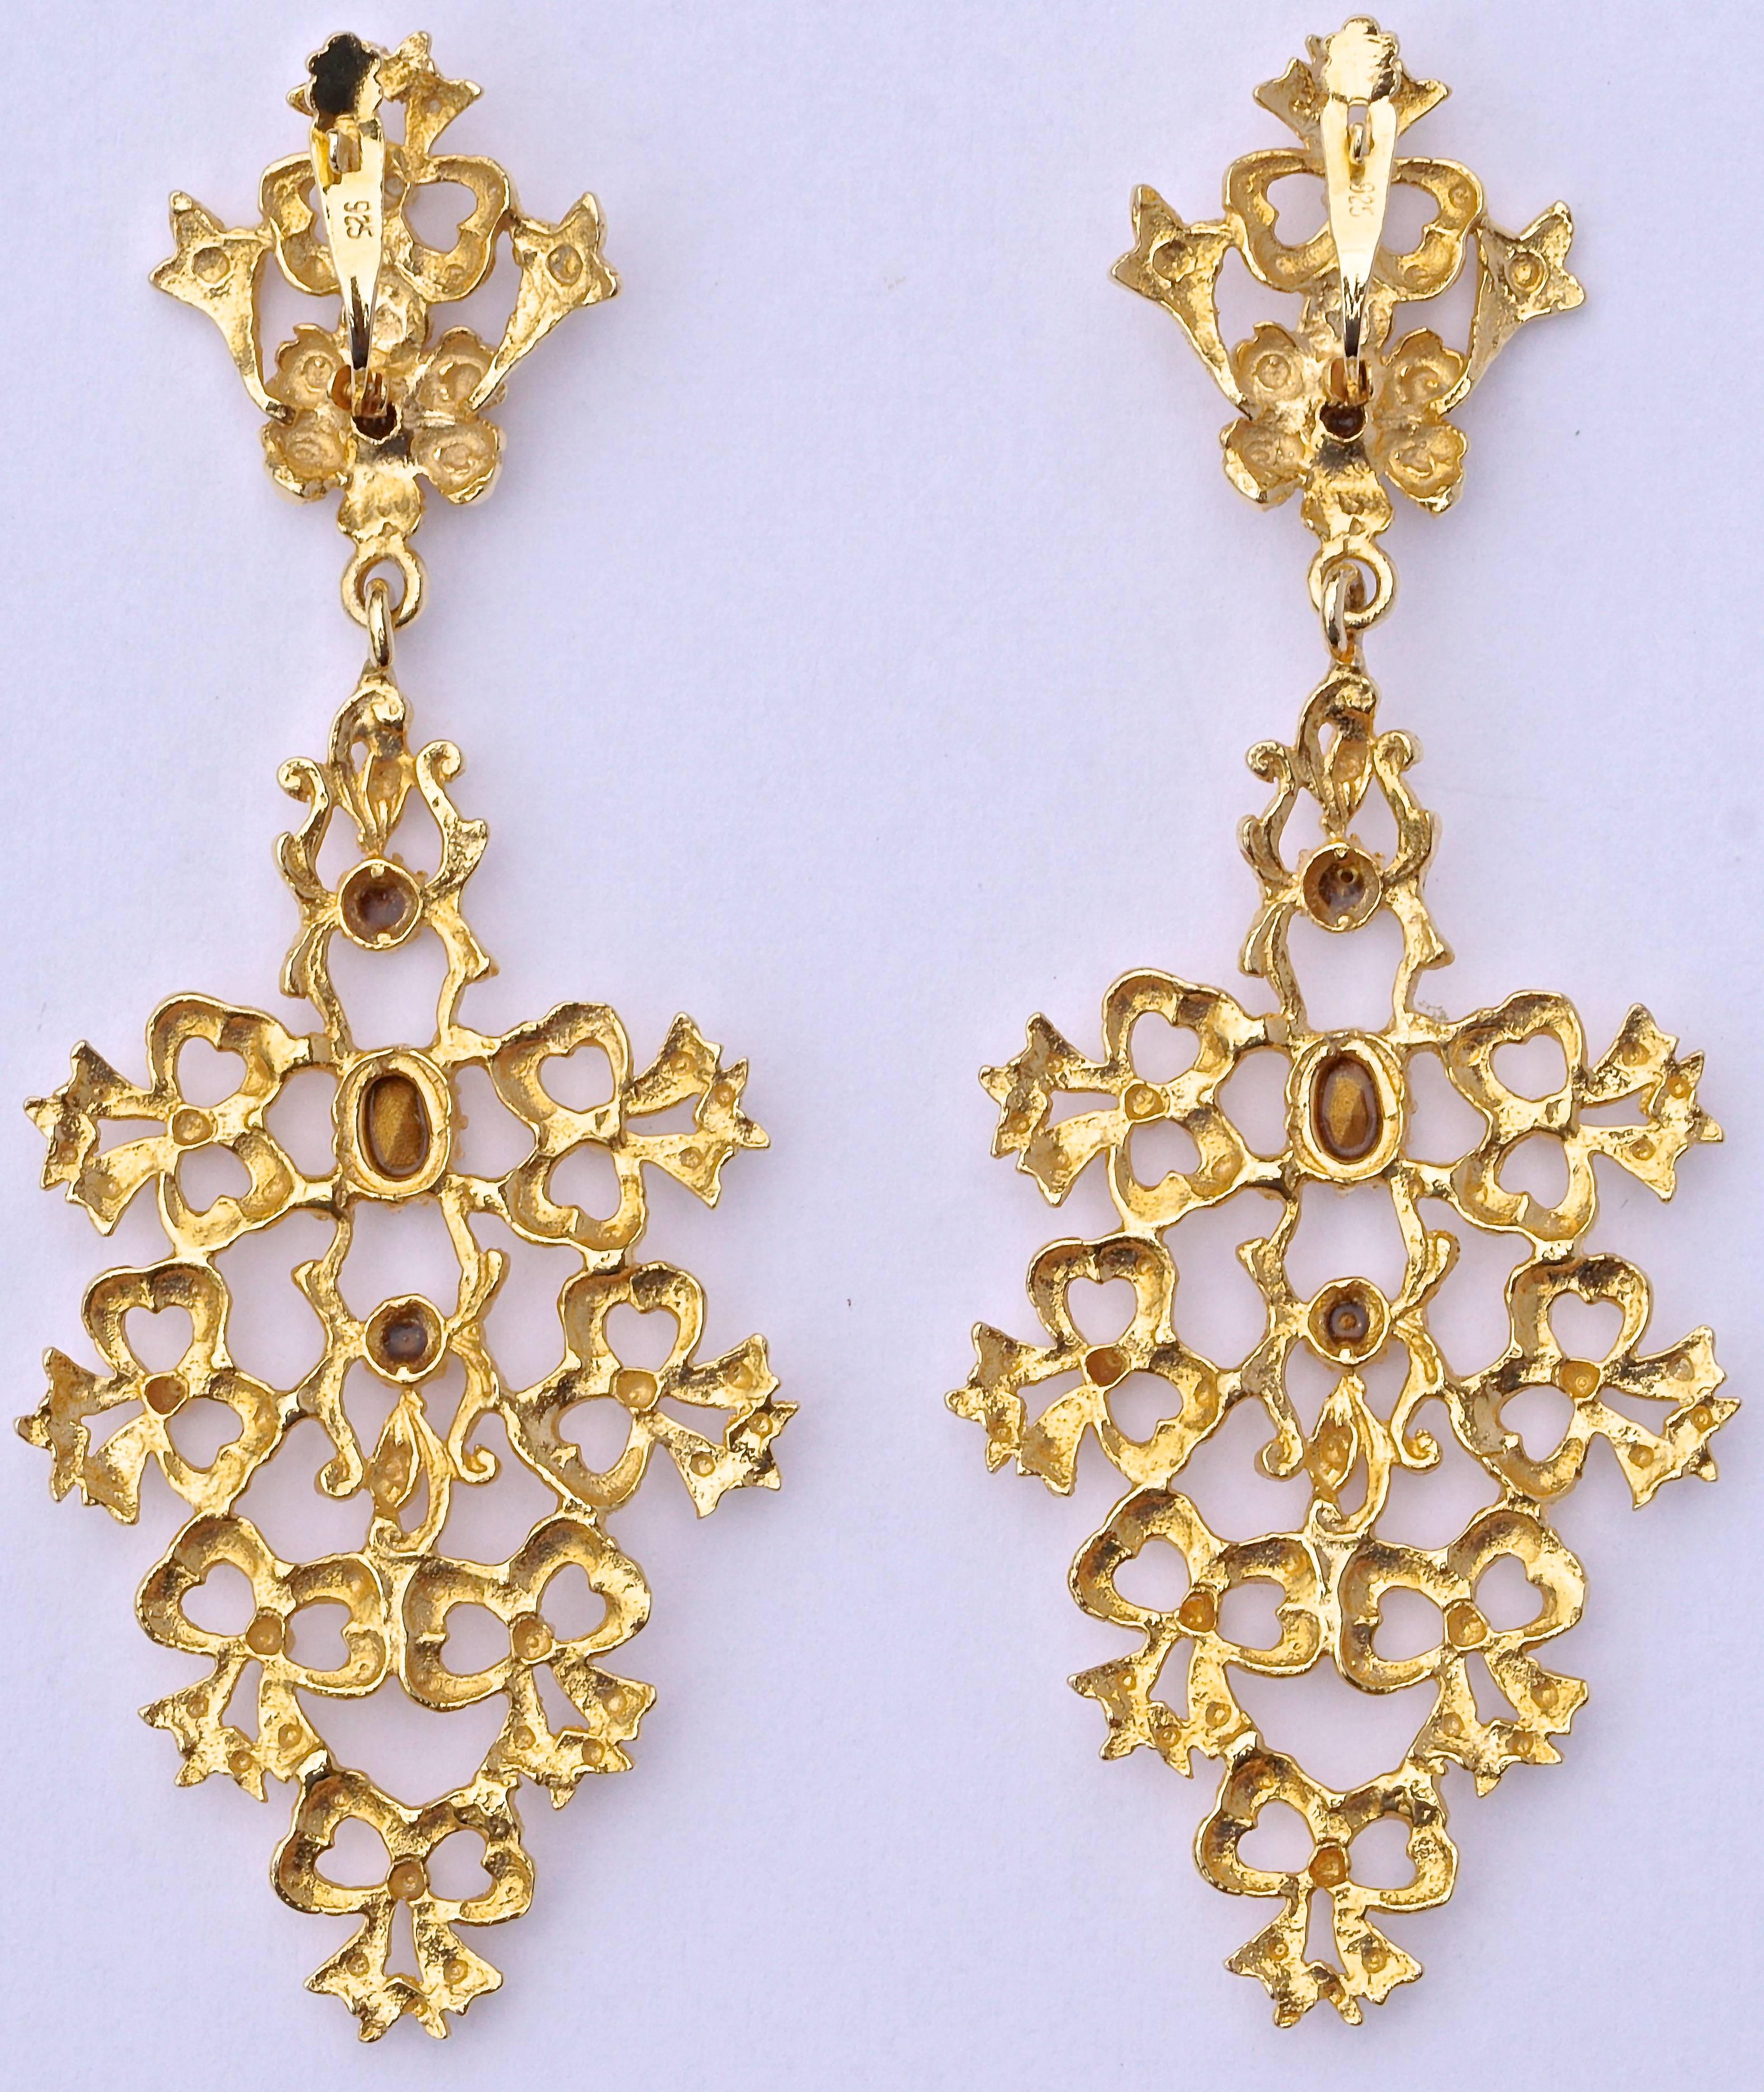 Gold tone chandelier earrings for pierced ears in an unusual bow design, and set with four clear faceted rhinestones. The top has a flower embellished with a rhinestone. Length 8.2cm, 3.23 inches, maximum width 3.2cm, 1.26 inches. They are in very